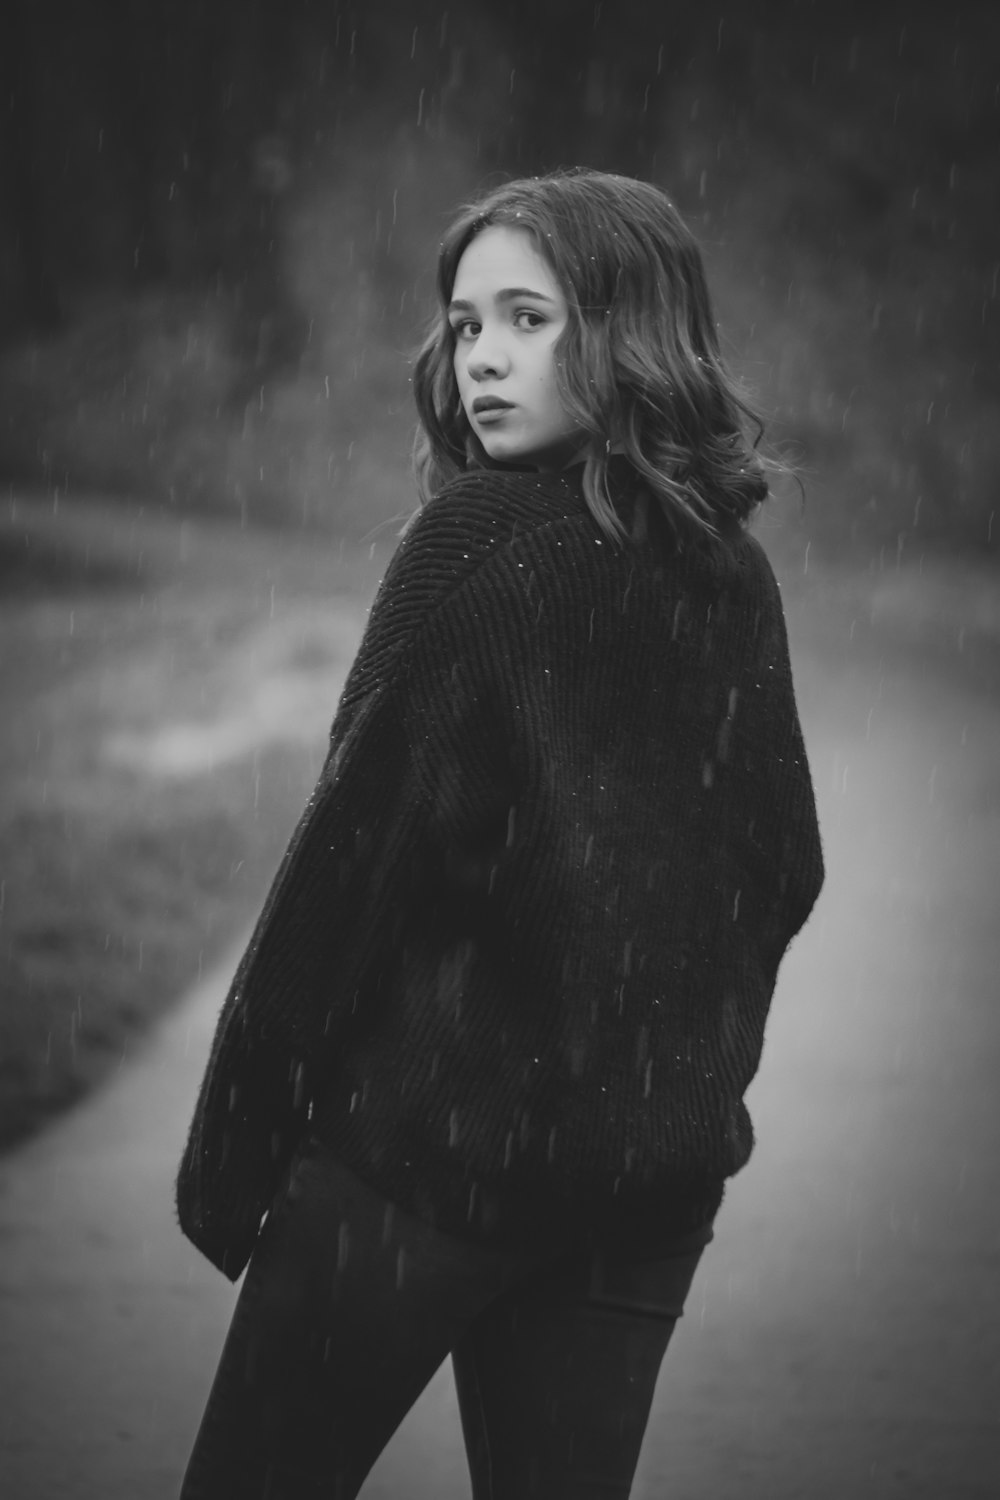 a woman standing in the rain wearing a black sweater